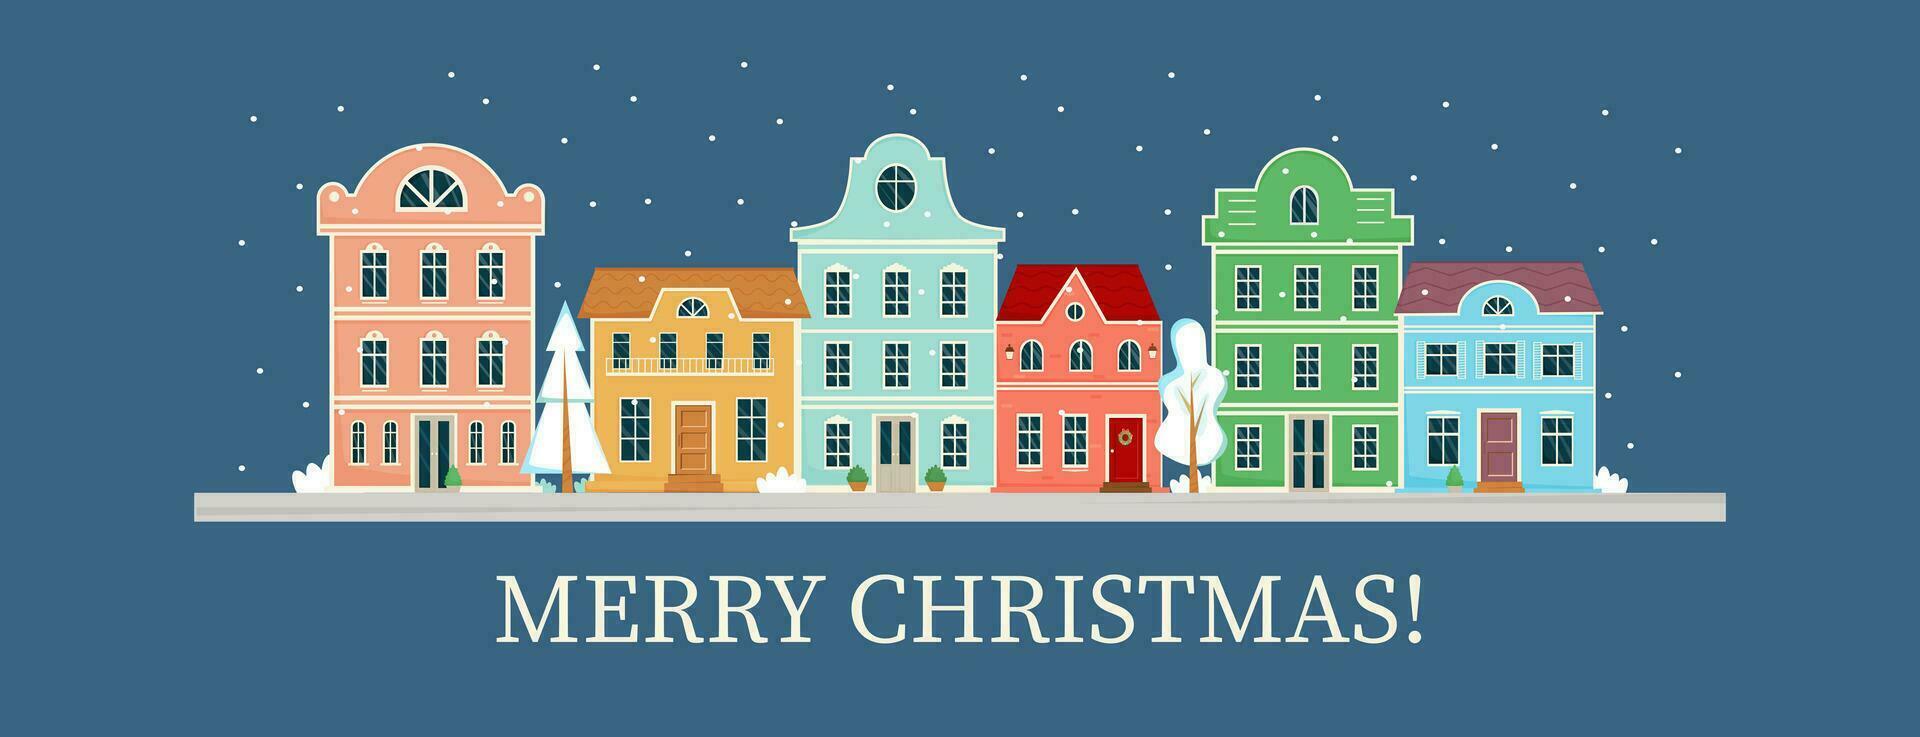 Street with cute colourful houses at winter night with inscription Merry Christmas.Traditional old european houses. Buildings front view. Winter town, city panorama. Vector illustration.